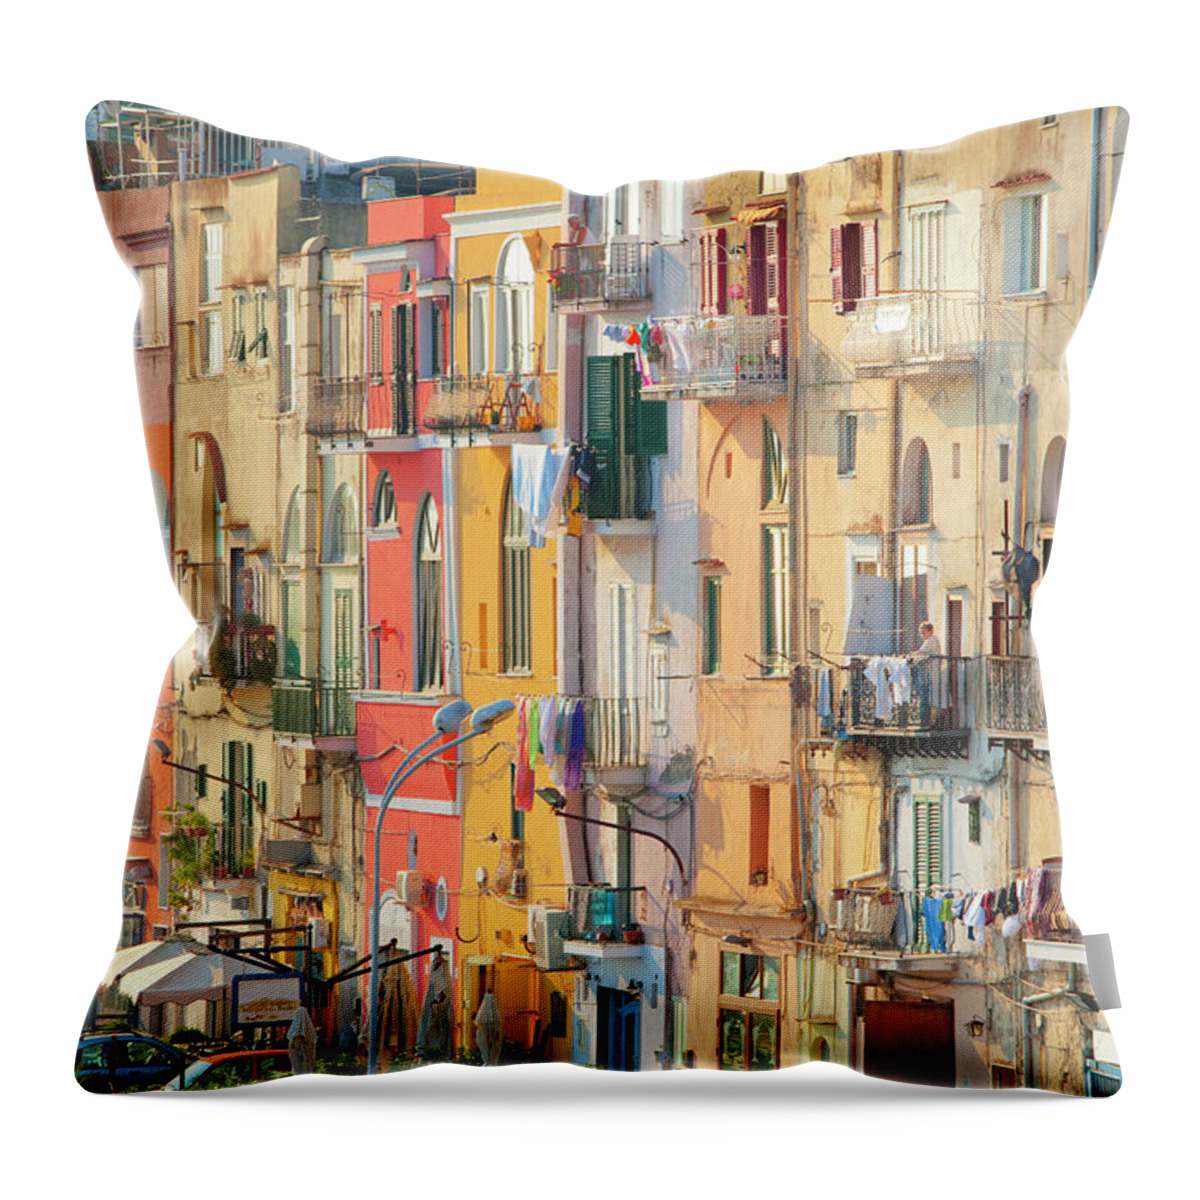 Built Structure Throw Pillow featuring the photograph Italy, Procida Island, Marina Grande by Frank Chmura